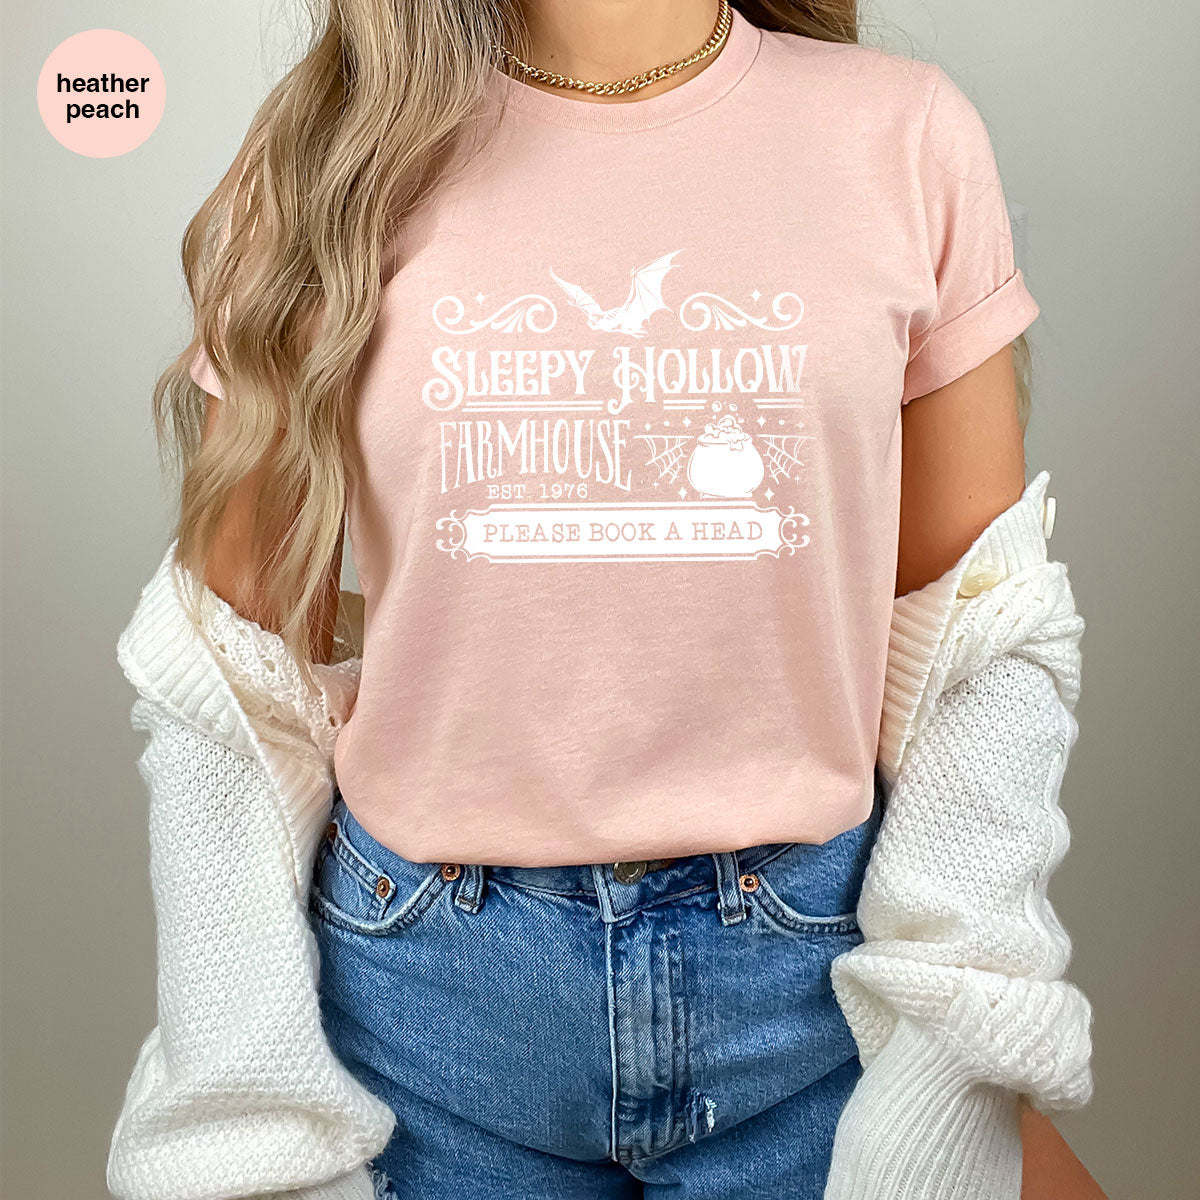 Spooky Season Clothing, Halloween Party Shirts, Farm Horror Outfit, Farmer Crewneck Sweatshirt, Witchy Gifts for Her, Witch Graphic Tees